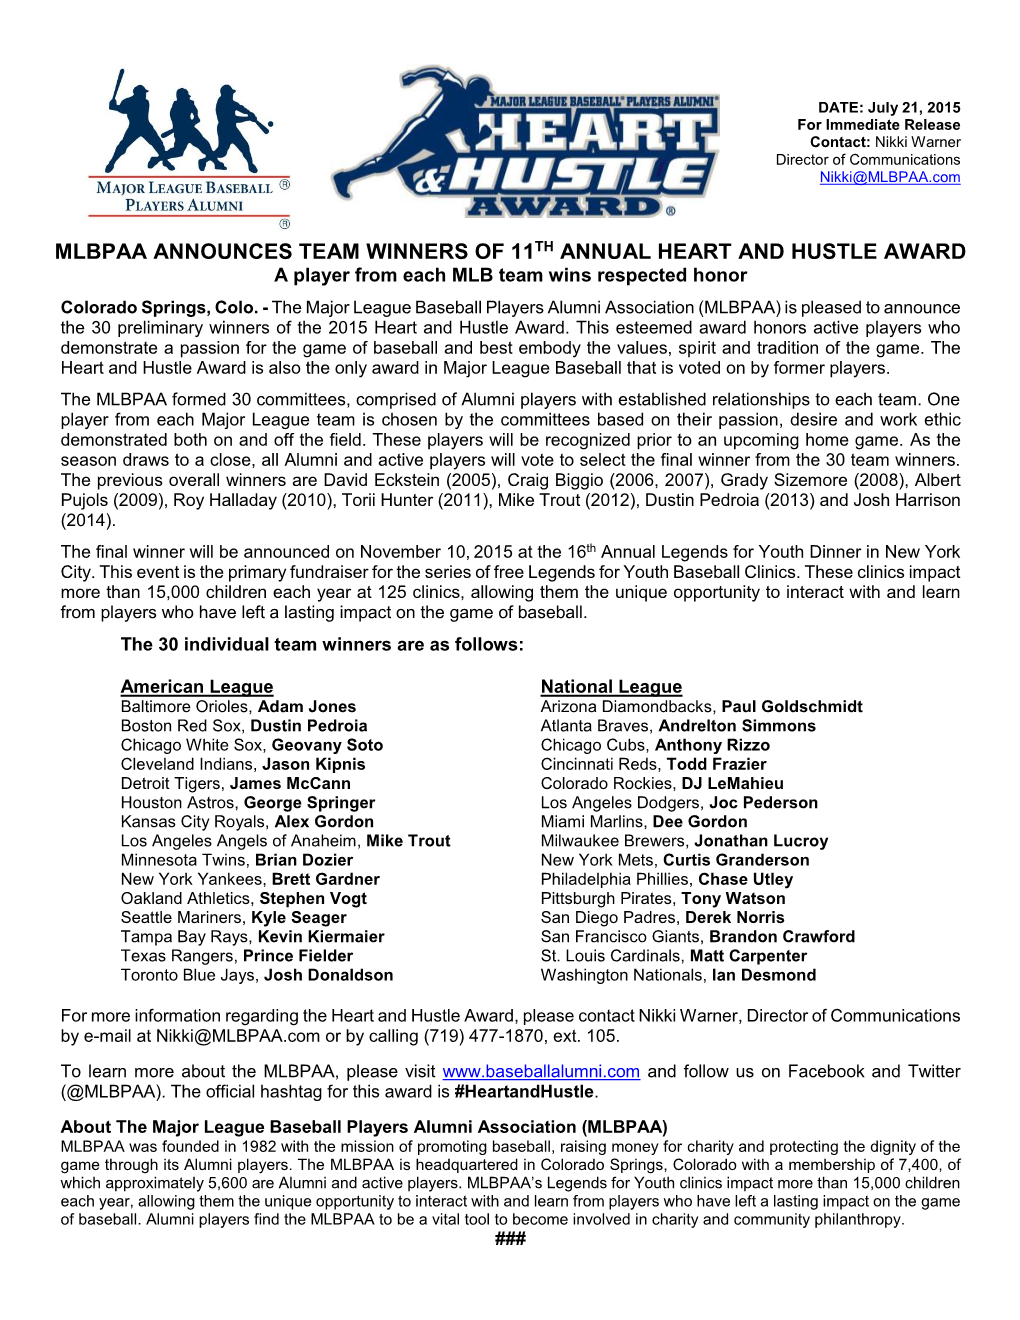 MLBPAA ANNOUNCES TEAM WINNERS of 11TH ANNUAL HEART and HUSTLE AWARD a Player from Each MLB Team Wins Respected Honor